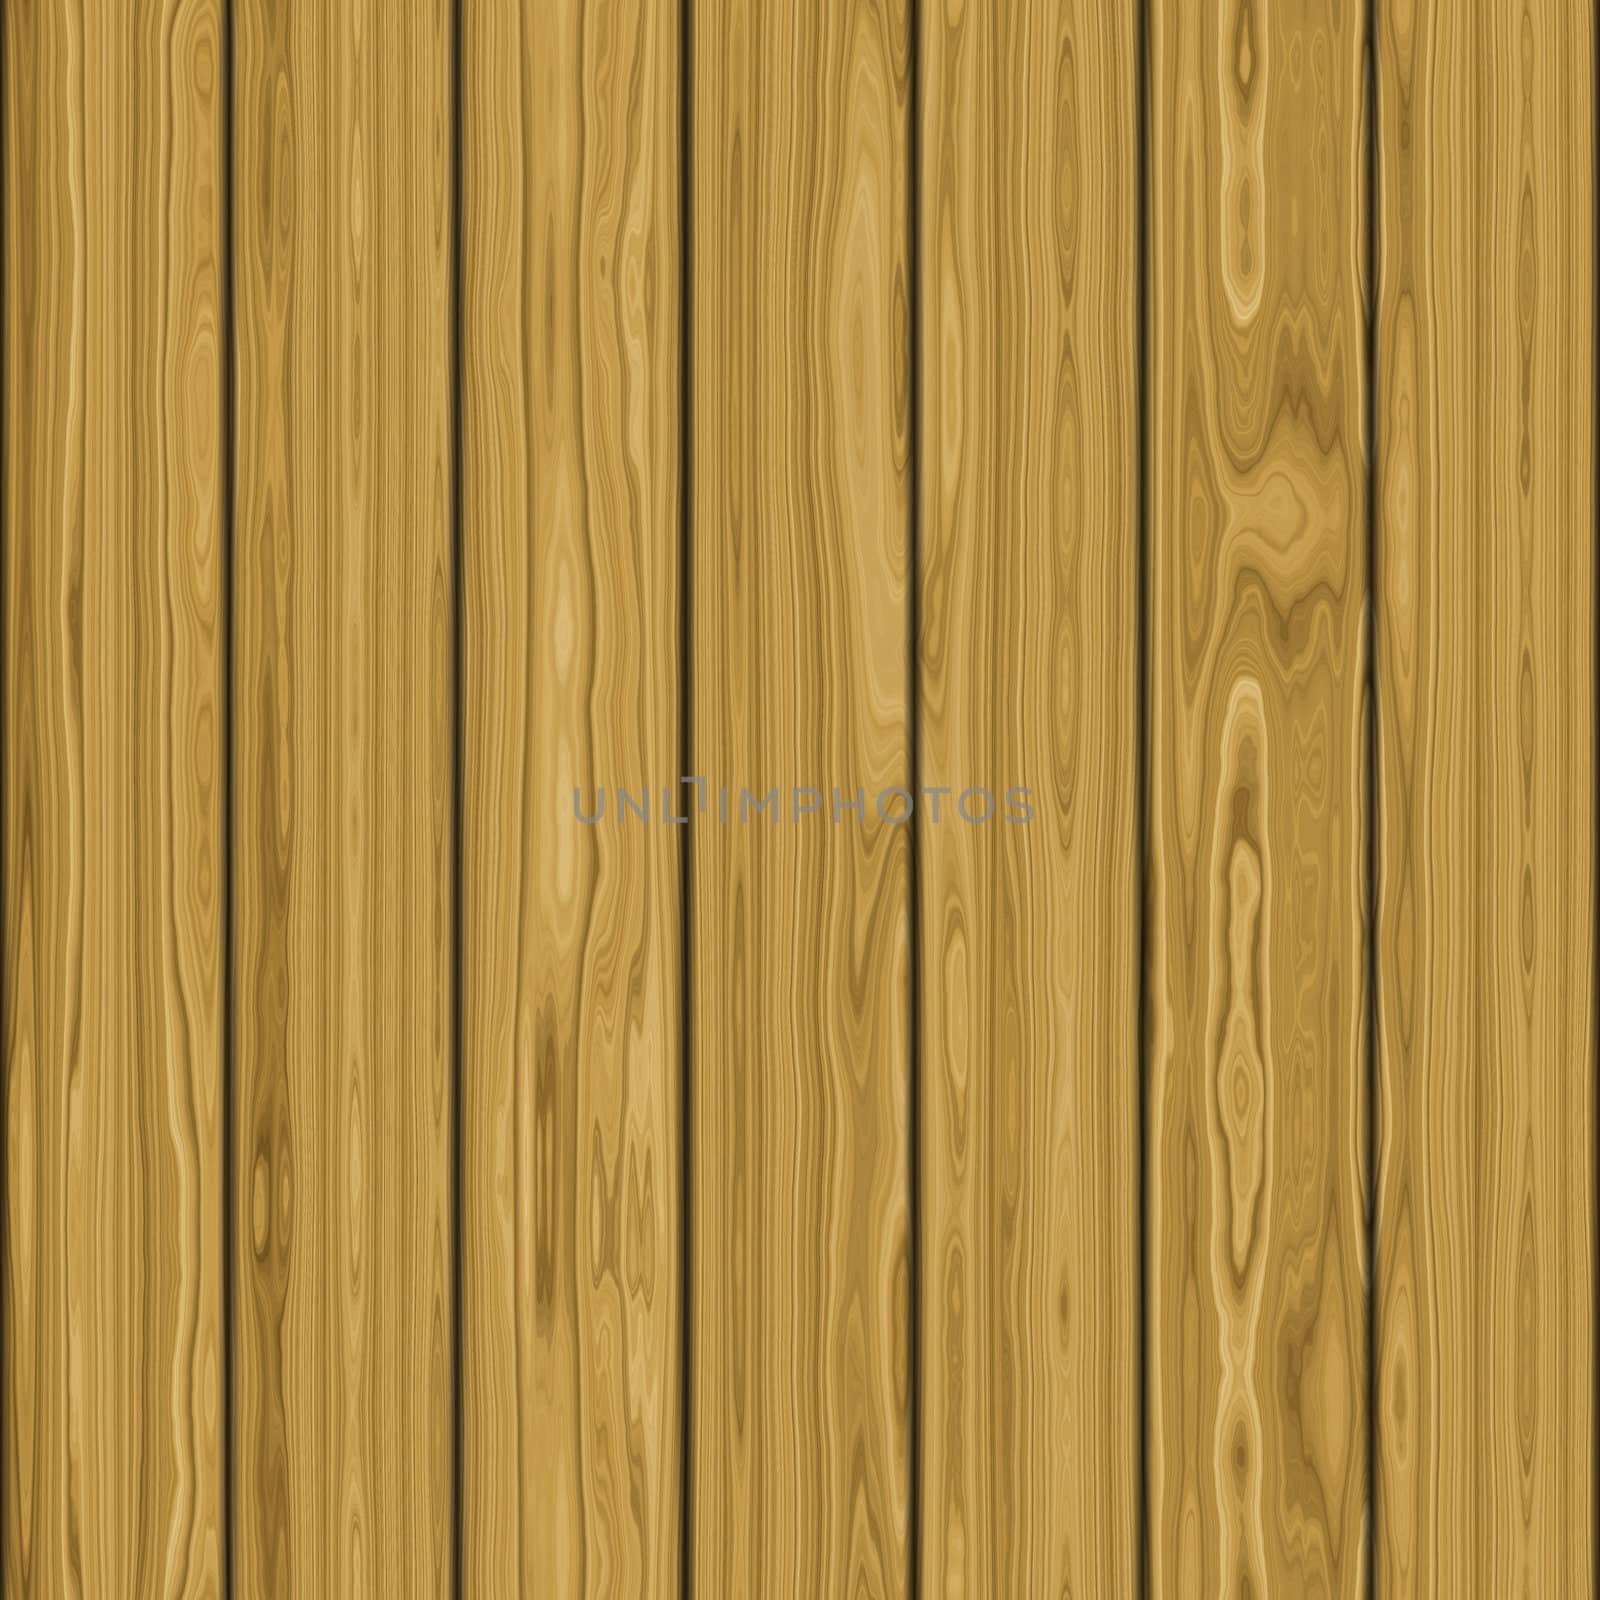 wood background texture by clearviewstock